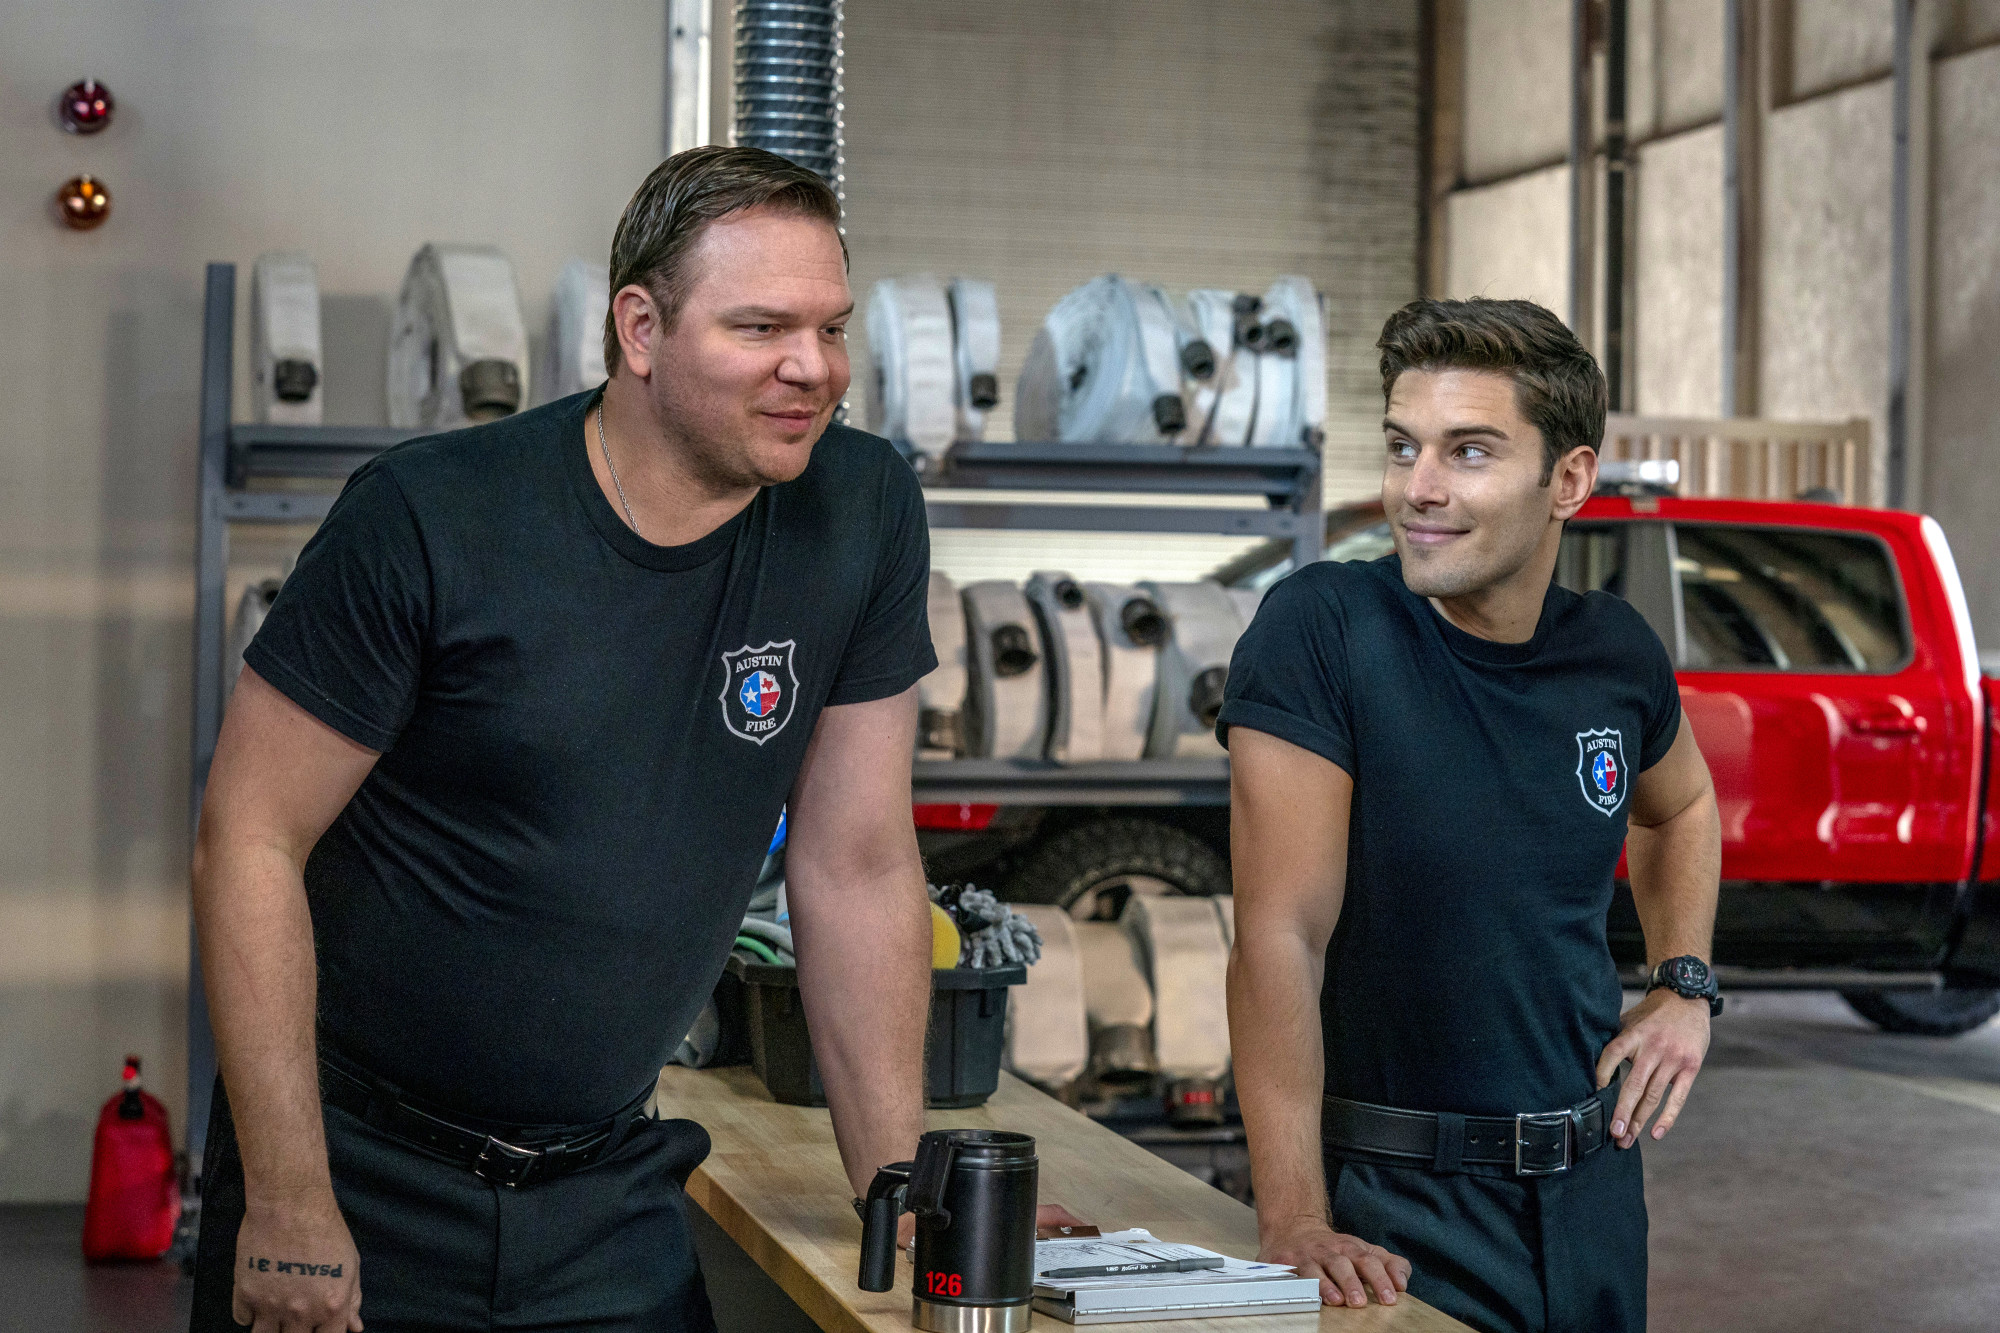 9-1-1: LONE STAR: L-R: Jim Parrack and Ronen Rubinstein in the “Monster Inside” episode of 9-1-1: LONE STAR airing Monday, March 2 (8:00-9:01 PM ET/PT) on FOX. ©2020 Fox Media LLC. CR: Jack Zeman/FOX.